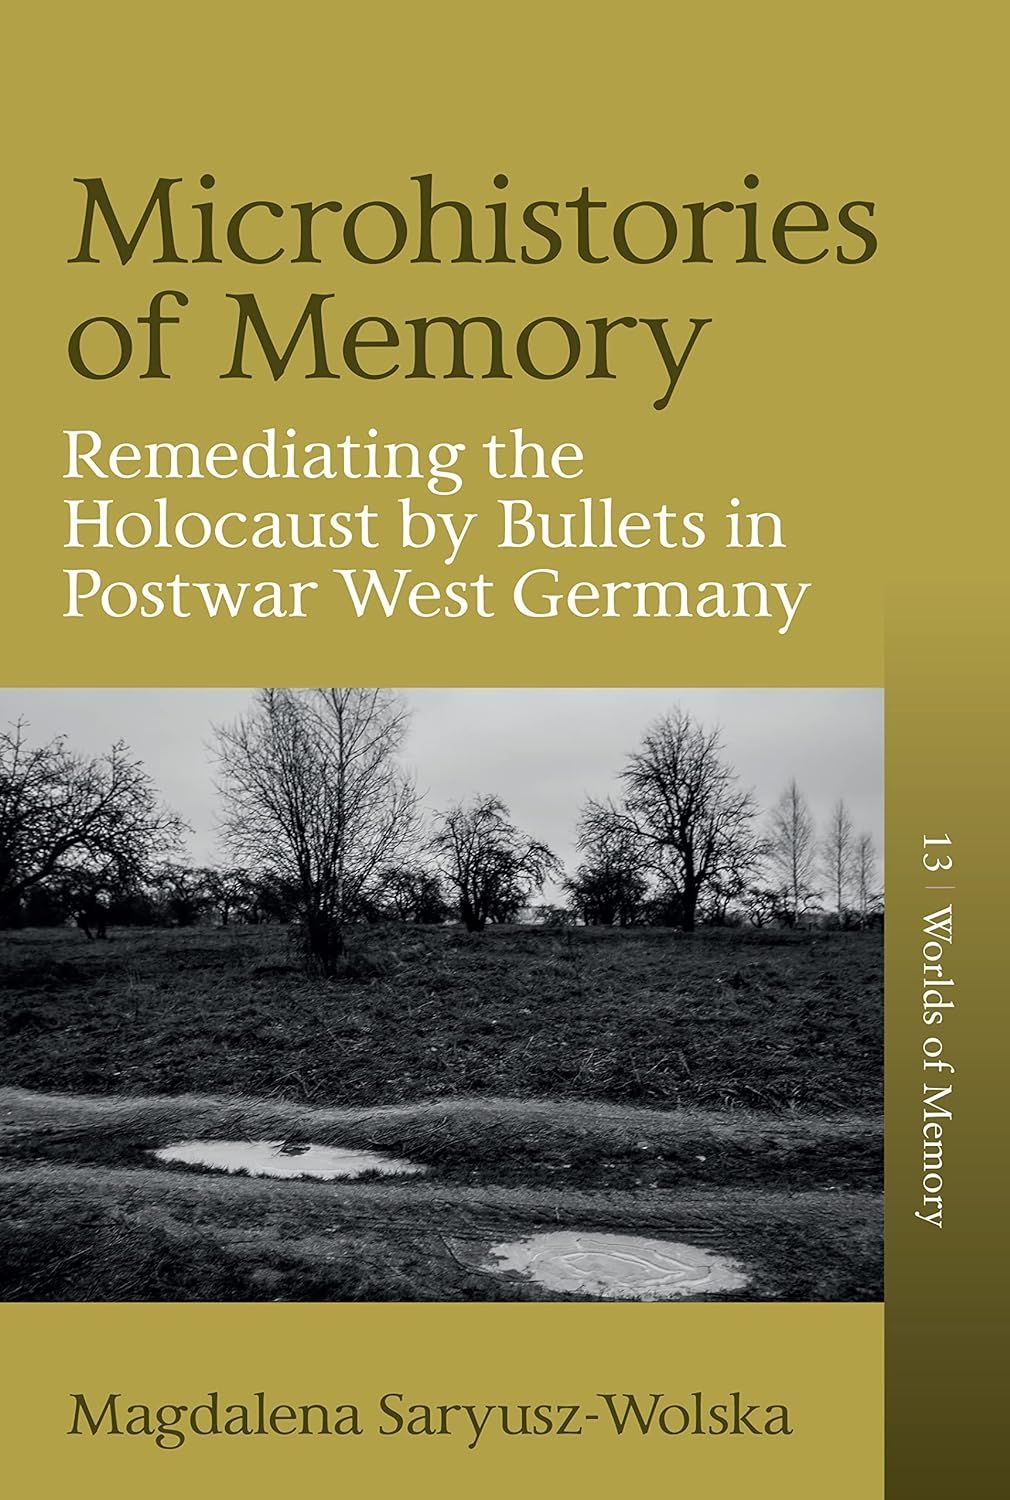 What Is the Point of Such Inhumane Programs? On Magdalena Saryusz-Wolska’s “Microhistories of Memory”